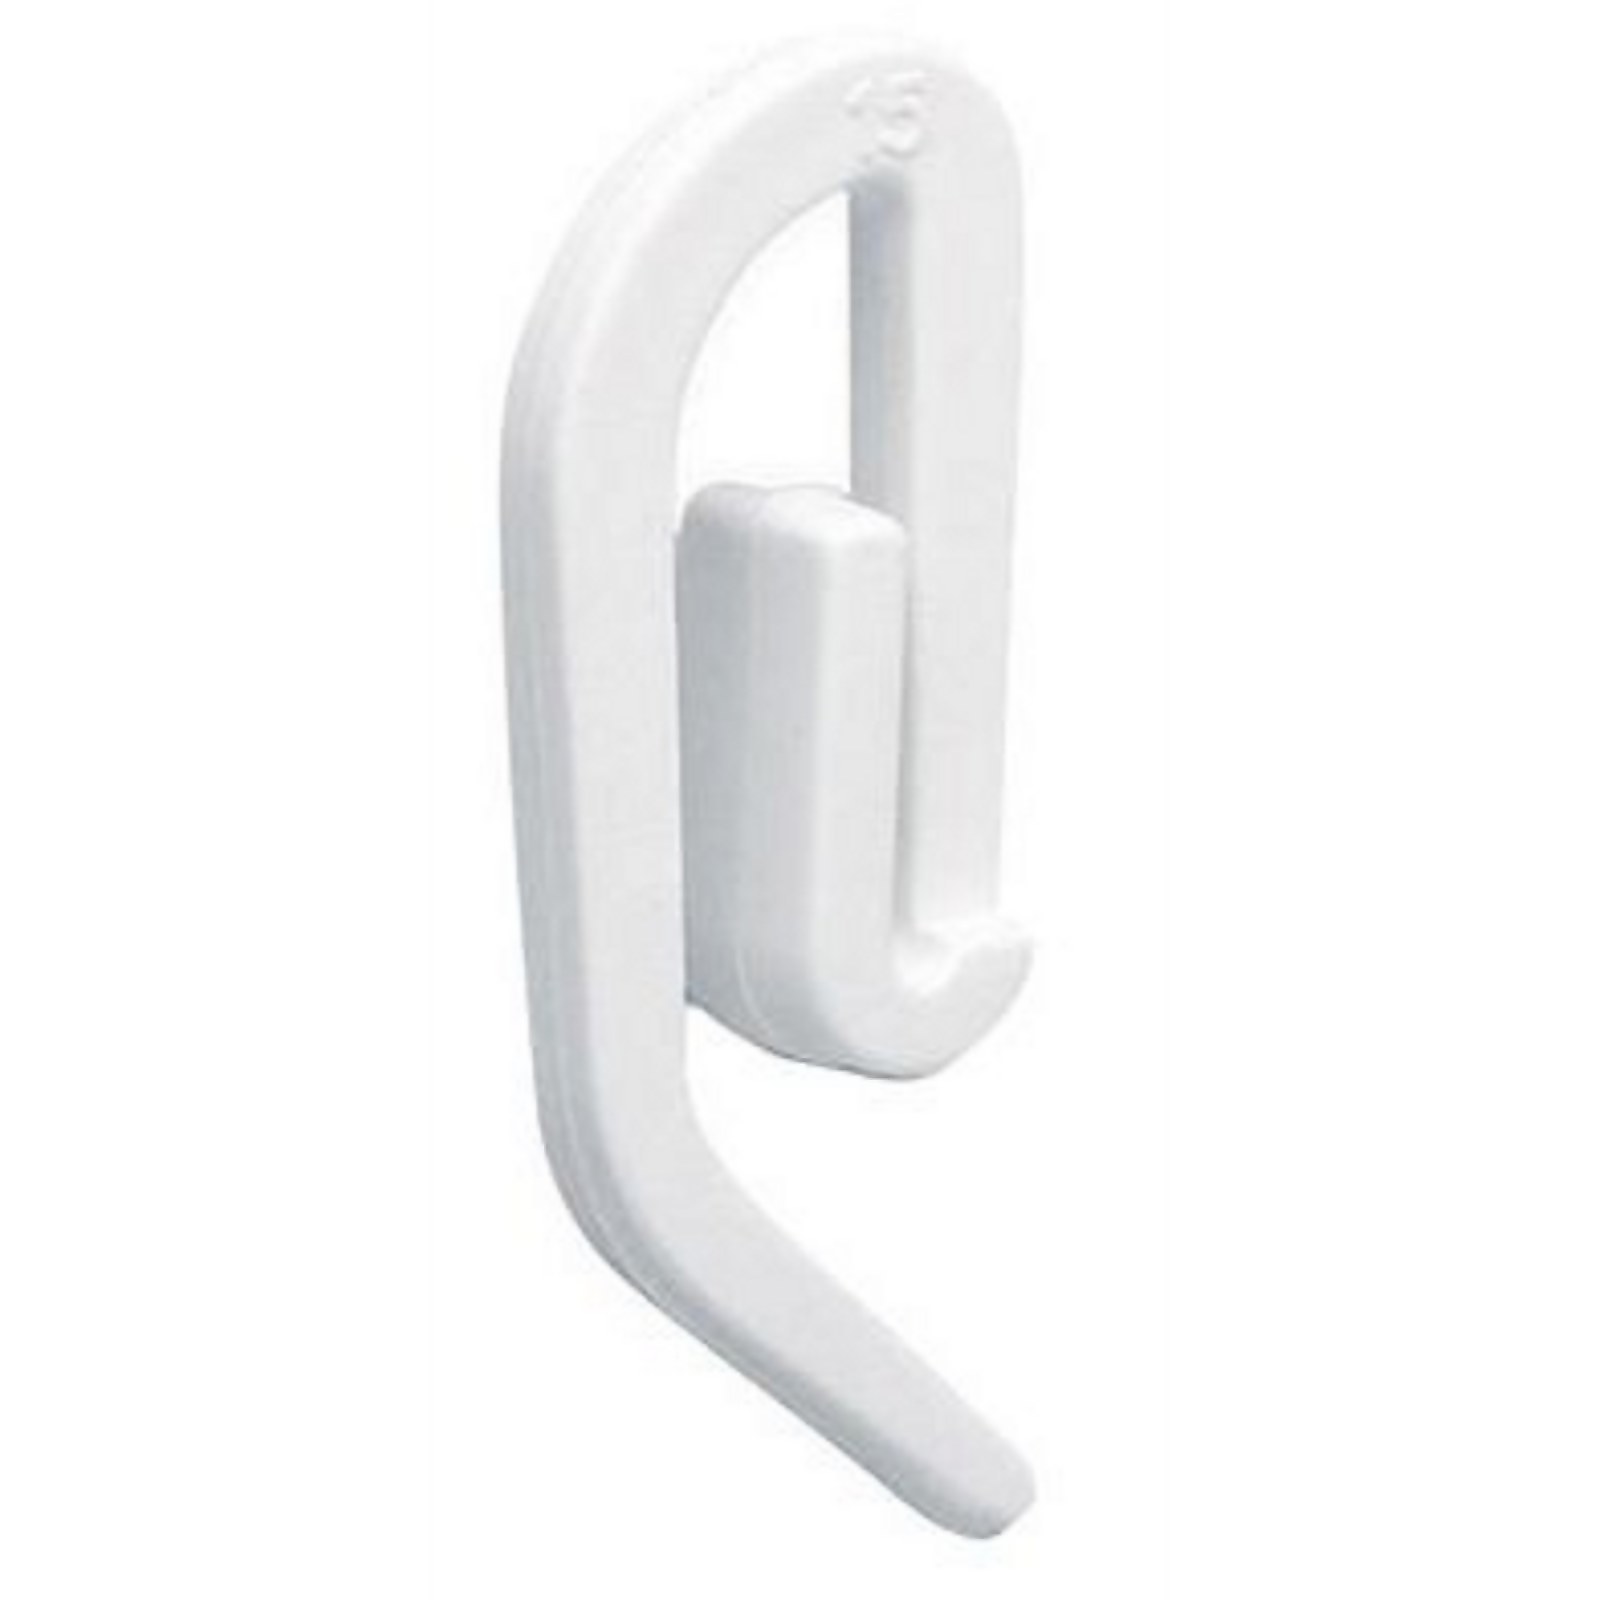 Photo of Curtain Hooks - 100 Pack